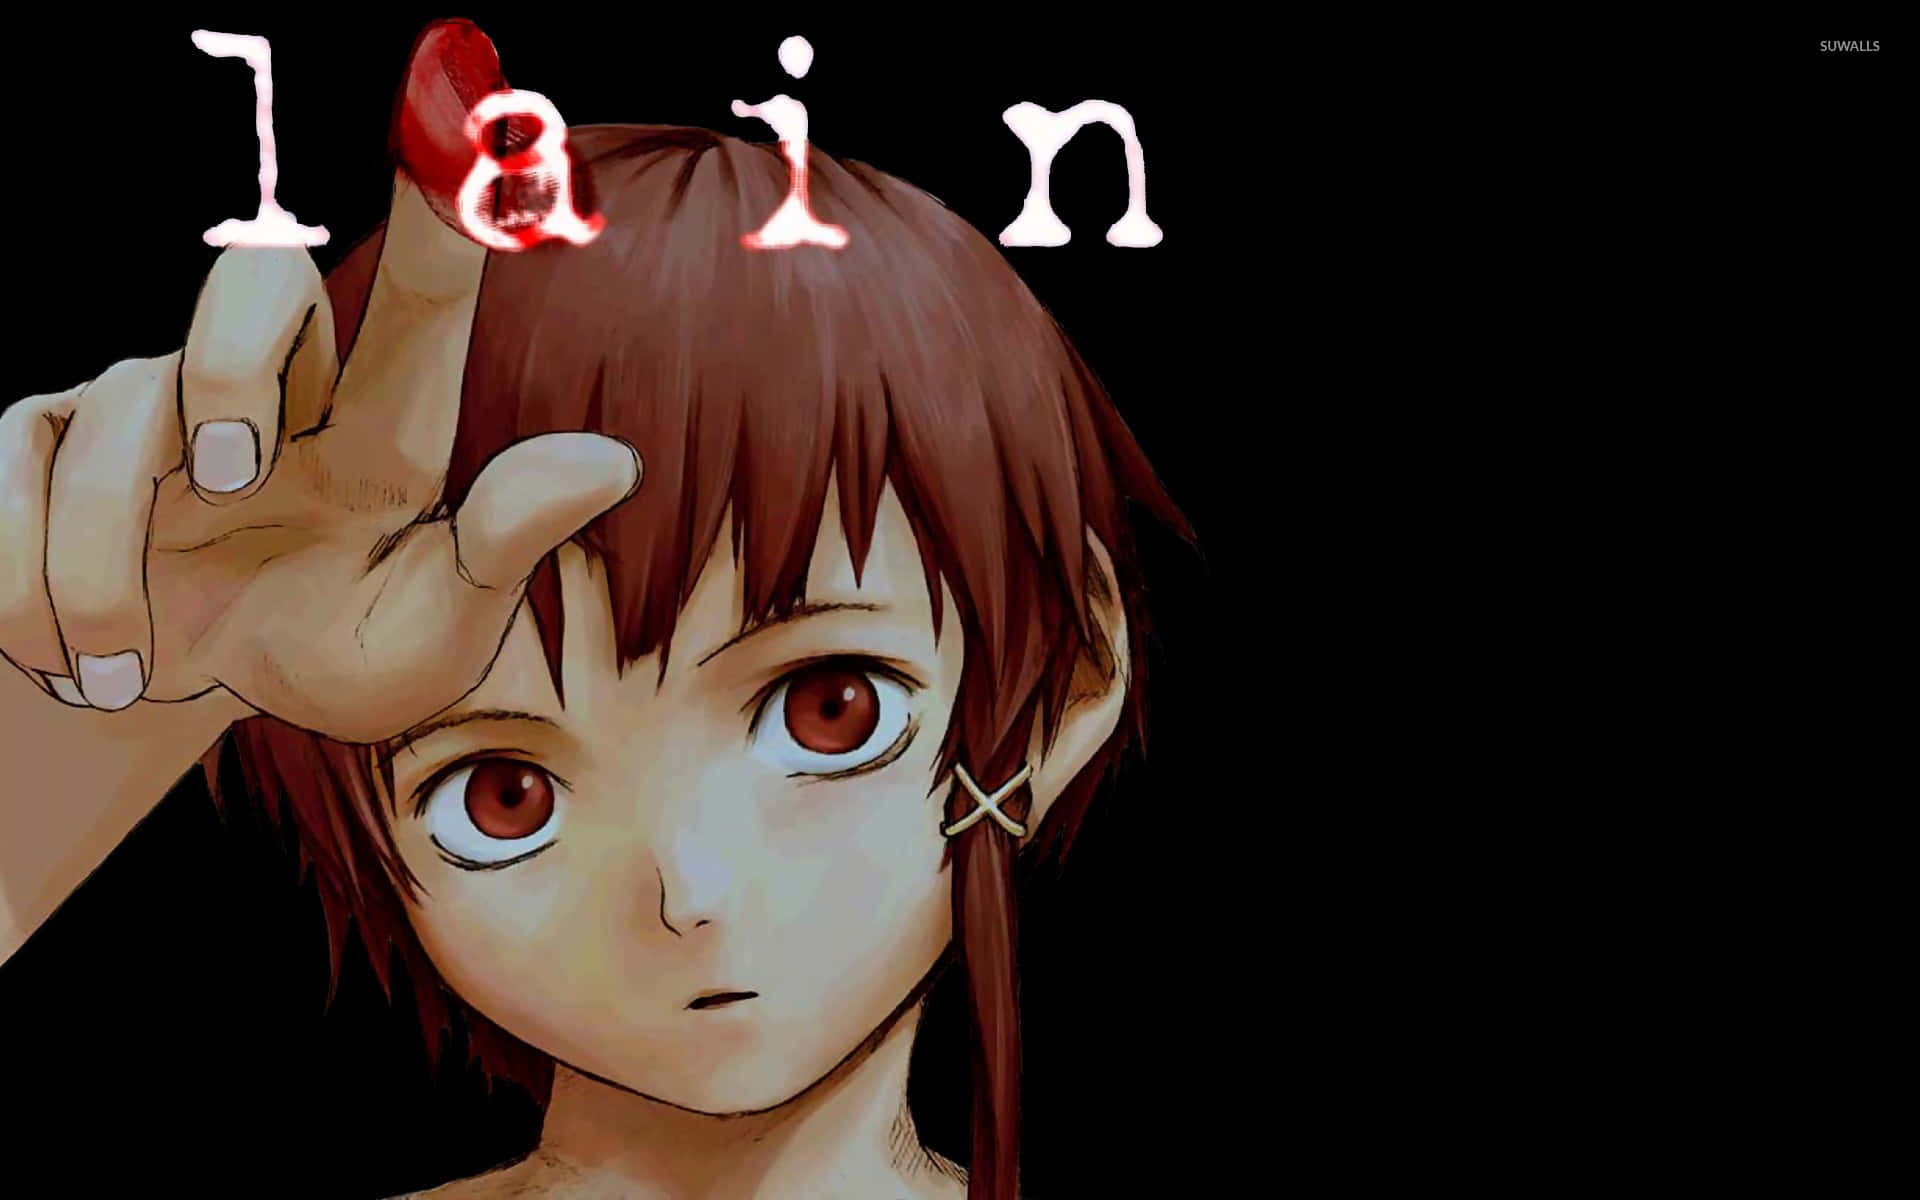 Serial Experiments Lain: Projecting The Human Mind